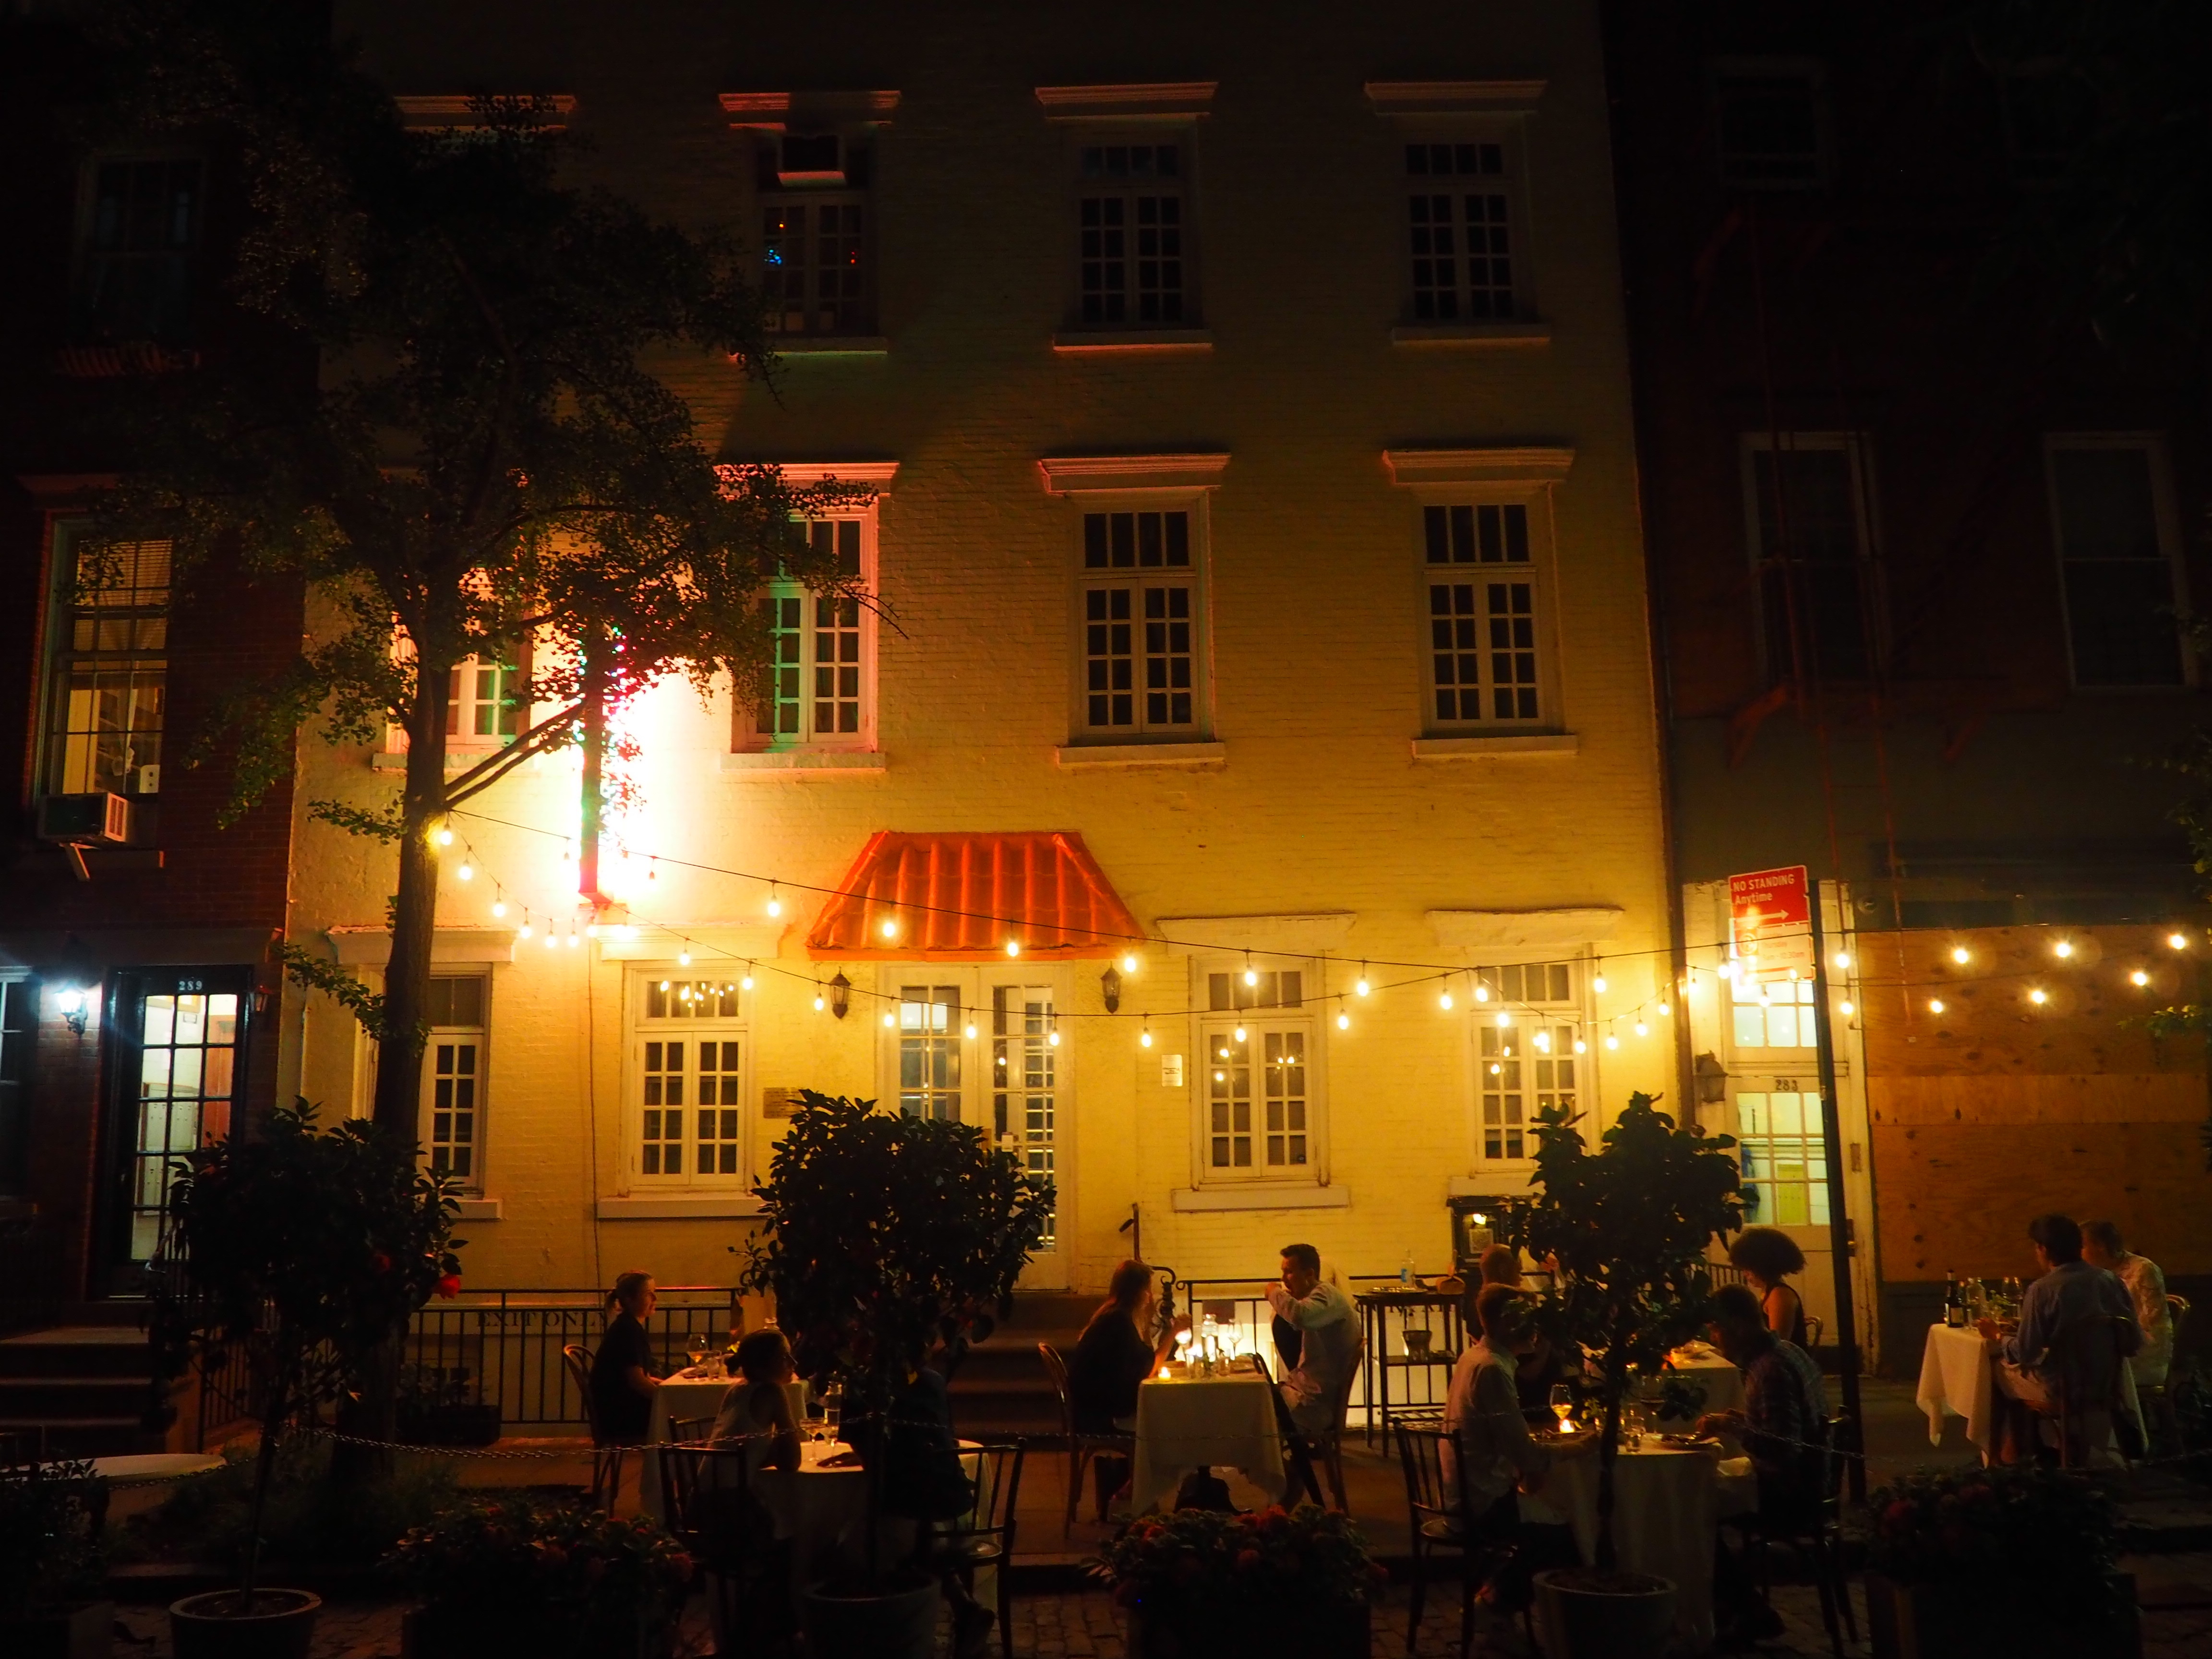 Outdoor dining in front of a restaurant at night with lights strung up around the outdoor tables